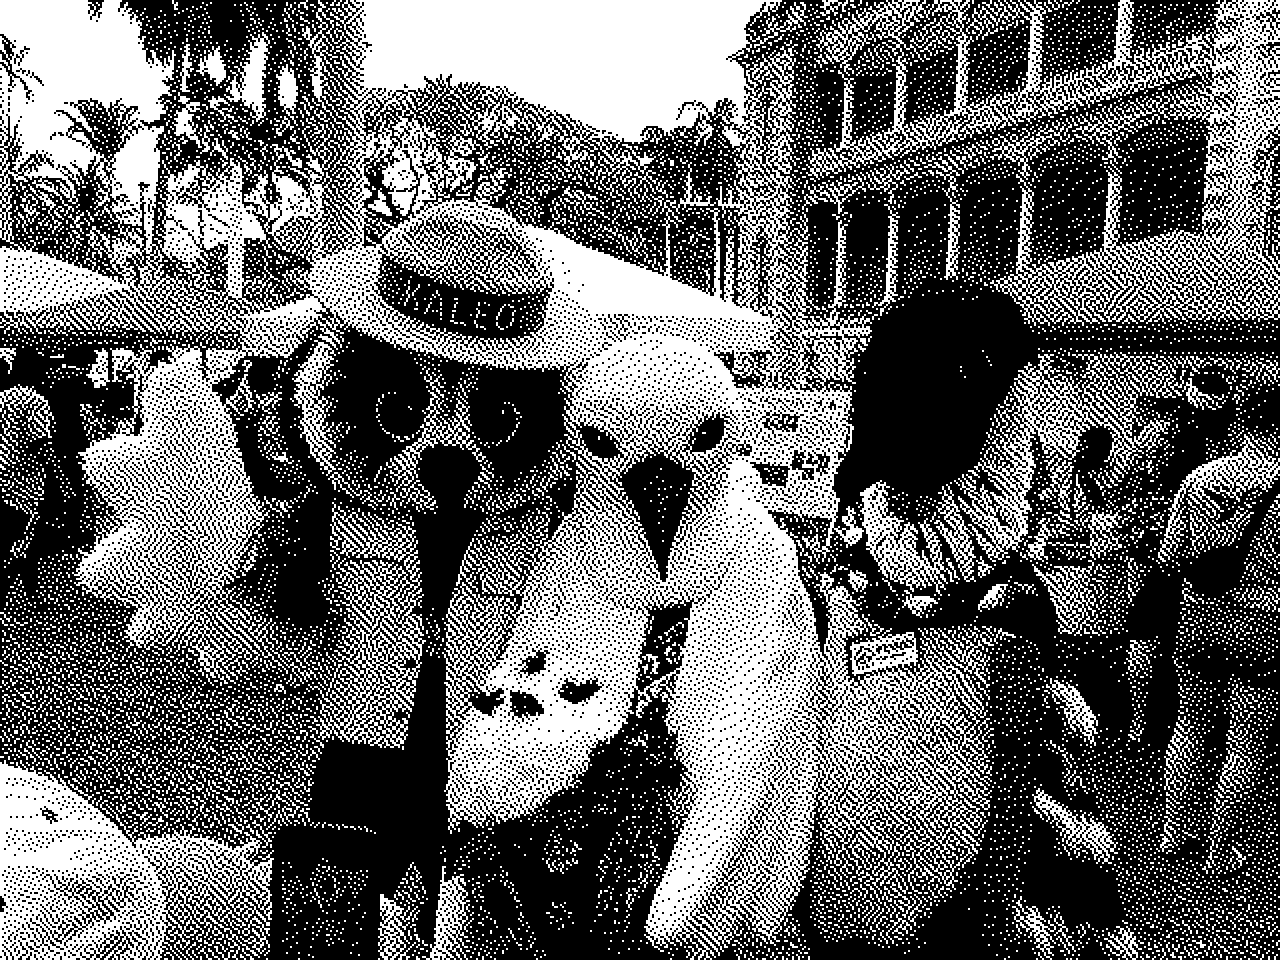 Three native species in bird costumes at ʻIolani Palace for today’s Manu o Kū festival.